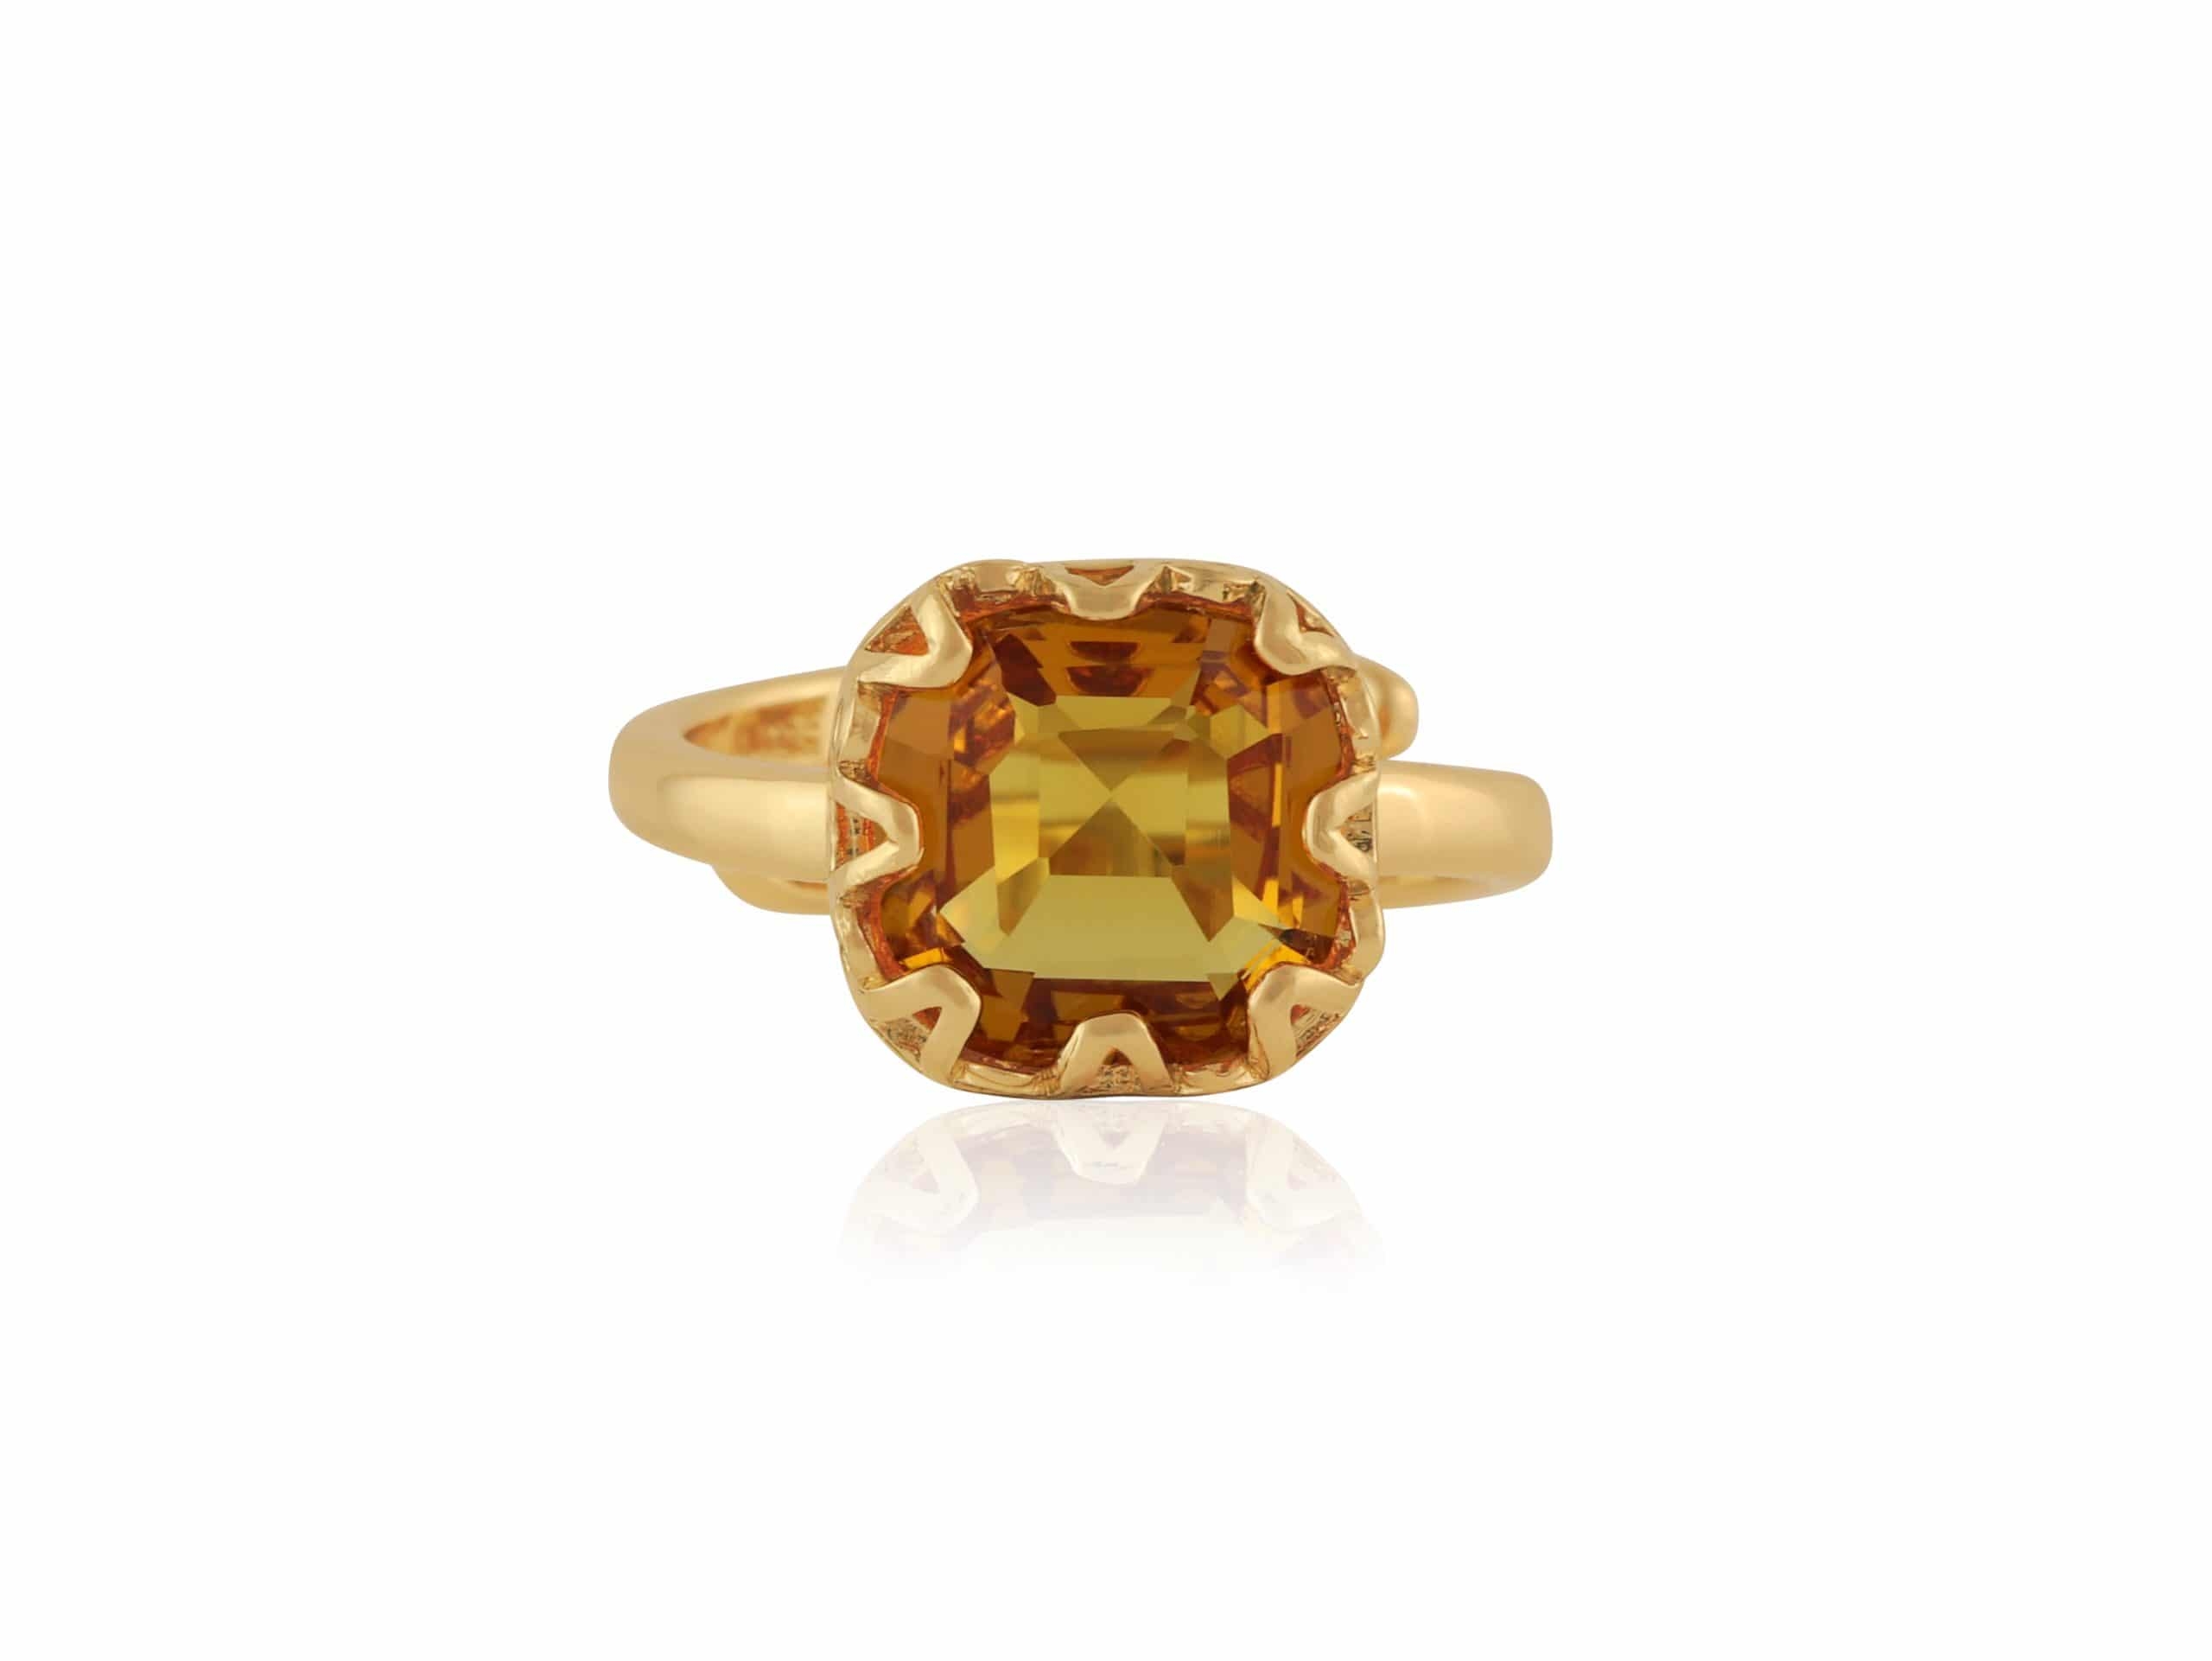 Adrian Square Gem Adjustable Ring In Gold and Topaz – Big Metal London